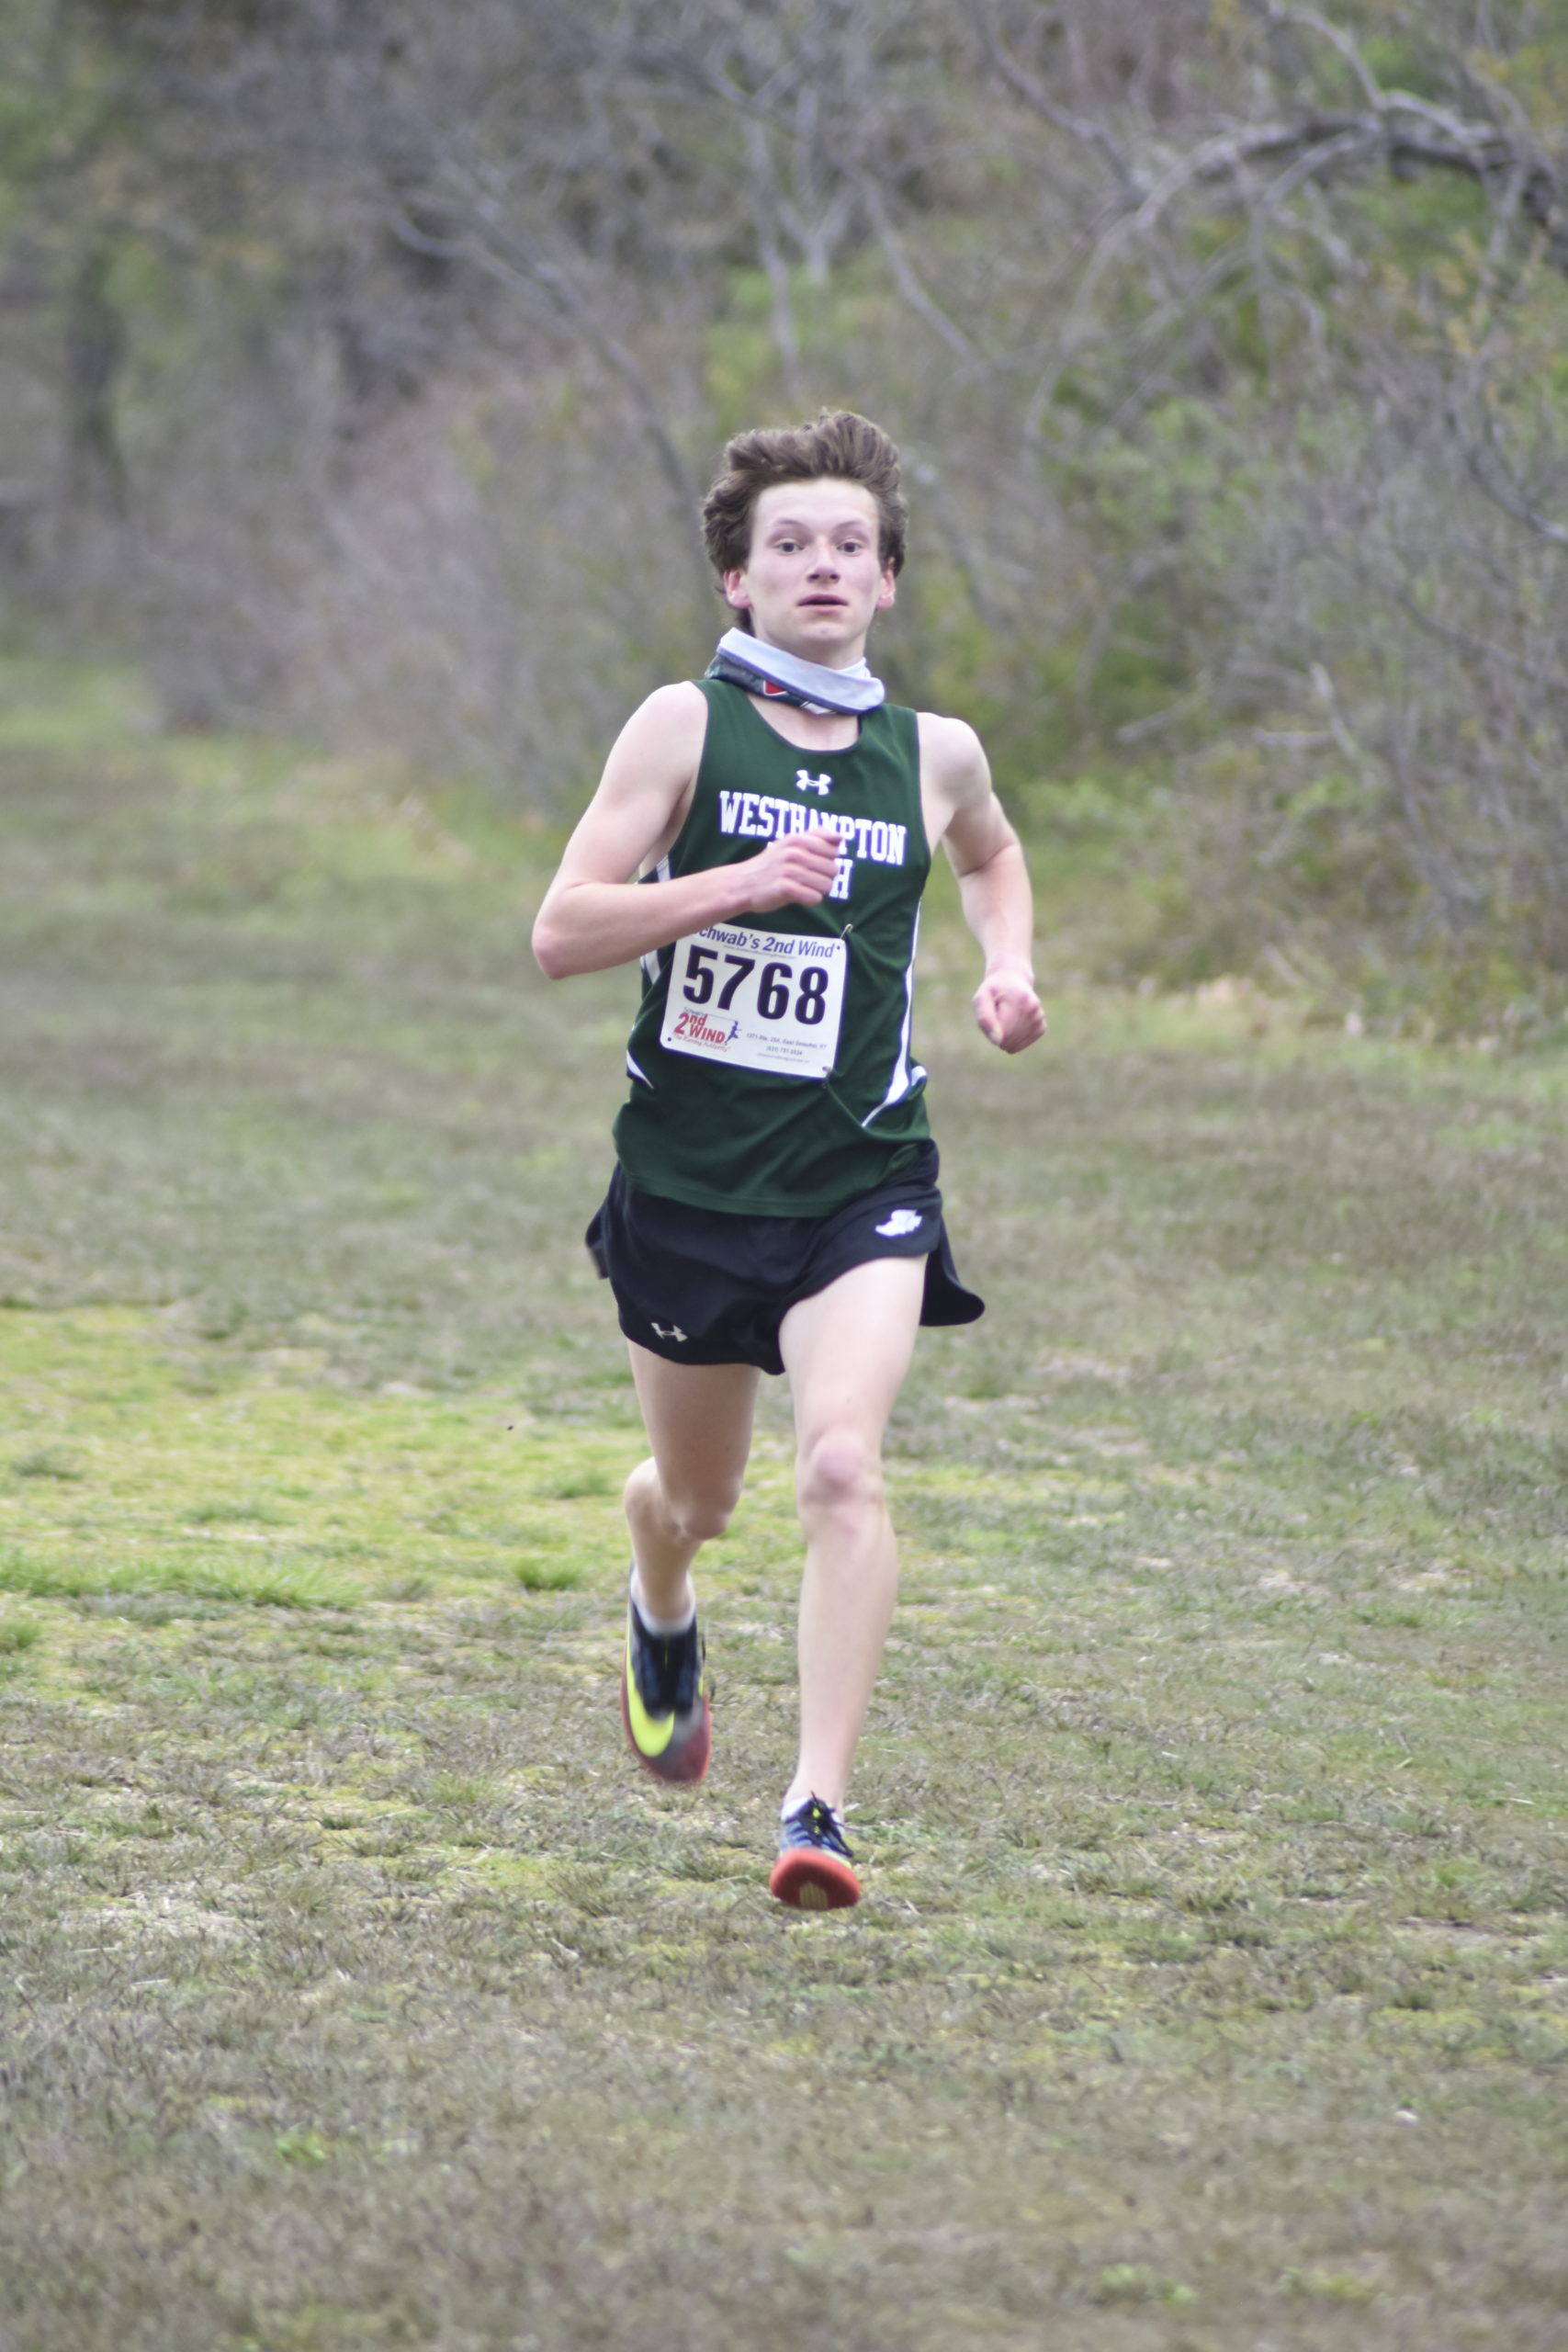 Max Haynia of Westhampton Beach placed second in the 'B' race.